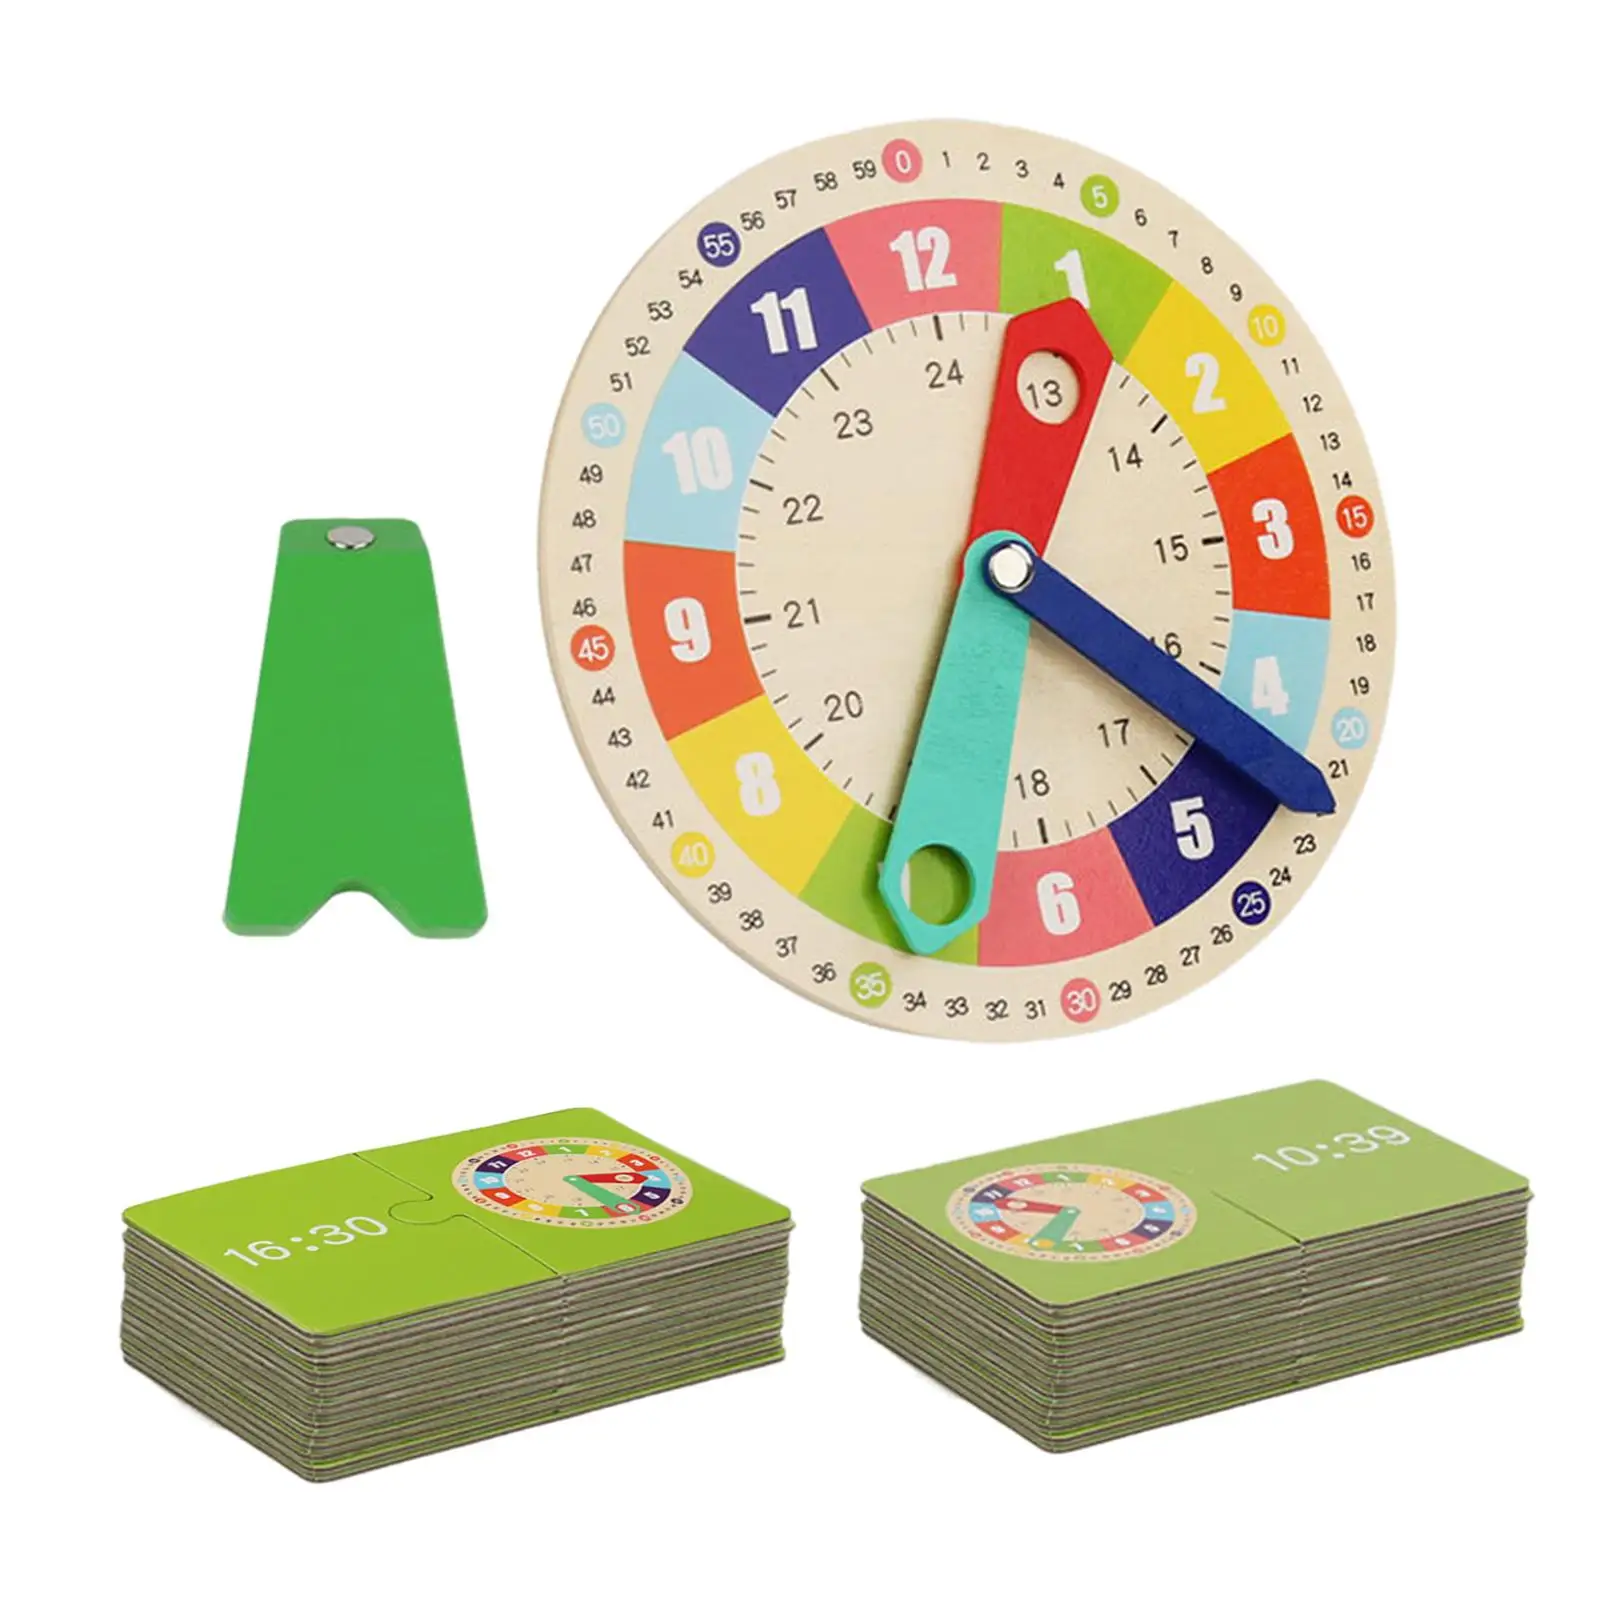 Wooden Clock Kids Toys Preschool Learning Life Skills Training Games Wooden Card Clock for Kindergarden Children Toddlers Baby